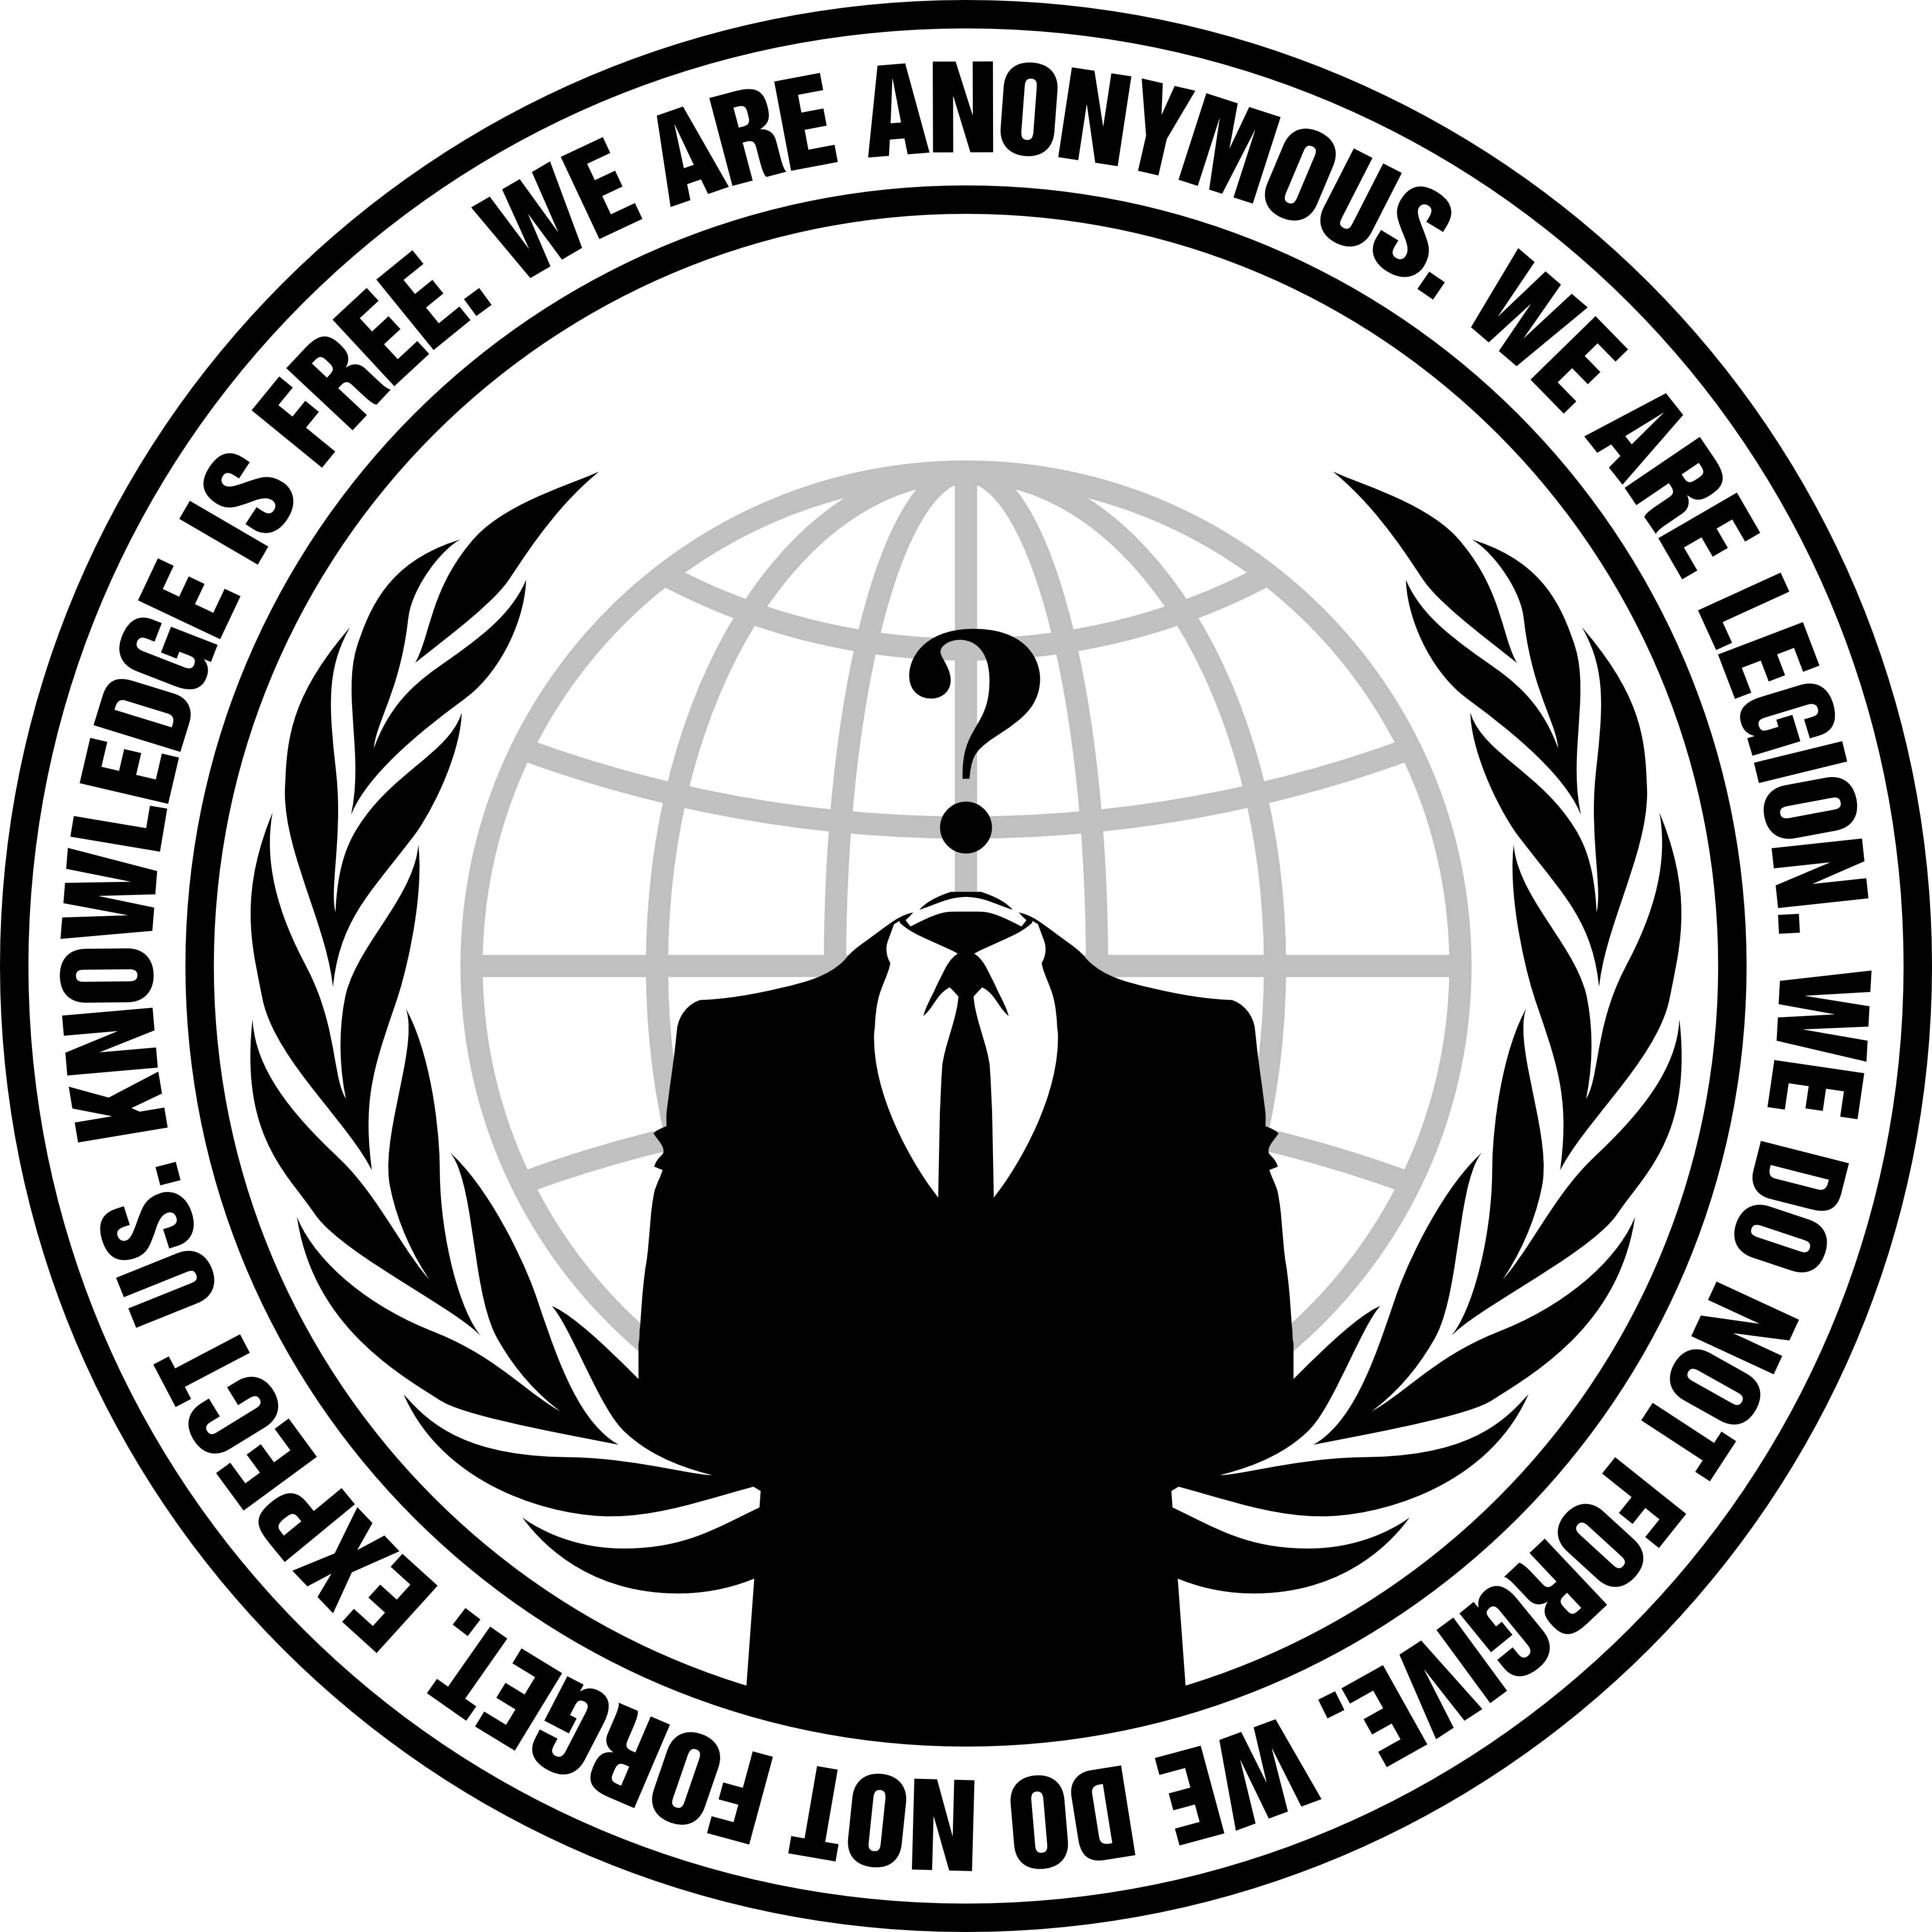 anonymous_logo_with_slogan_svg_animation_by_anondesign-d6rav5k.png